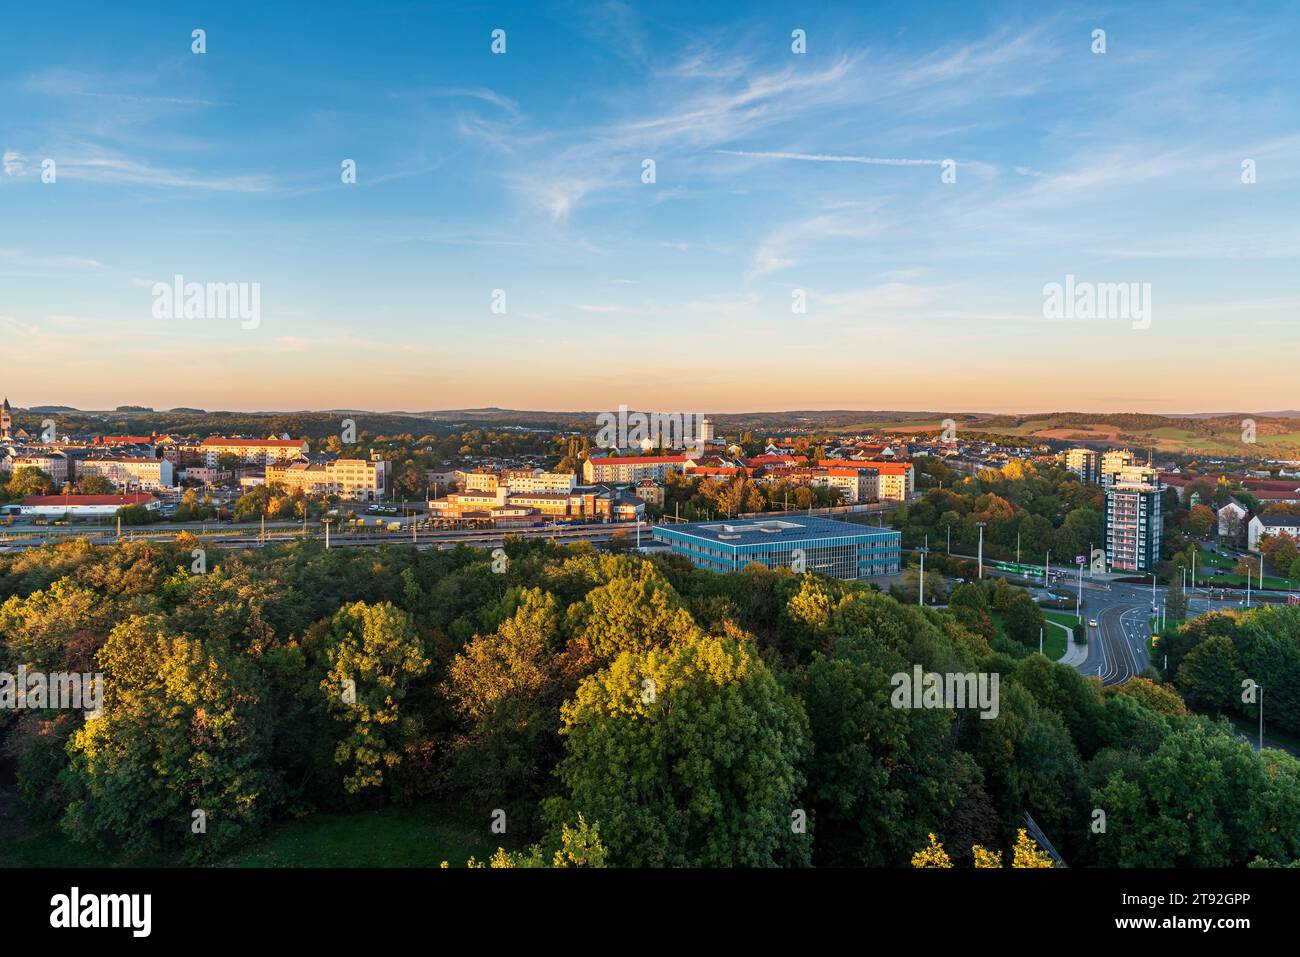 Plauen Vogtland Oberer Bahnhof railway station from lookout tower on Barenstein hill in Plauen city in Germany during autumn sunset Stock Photo